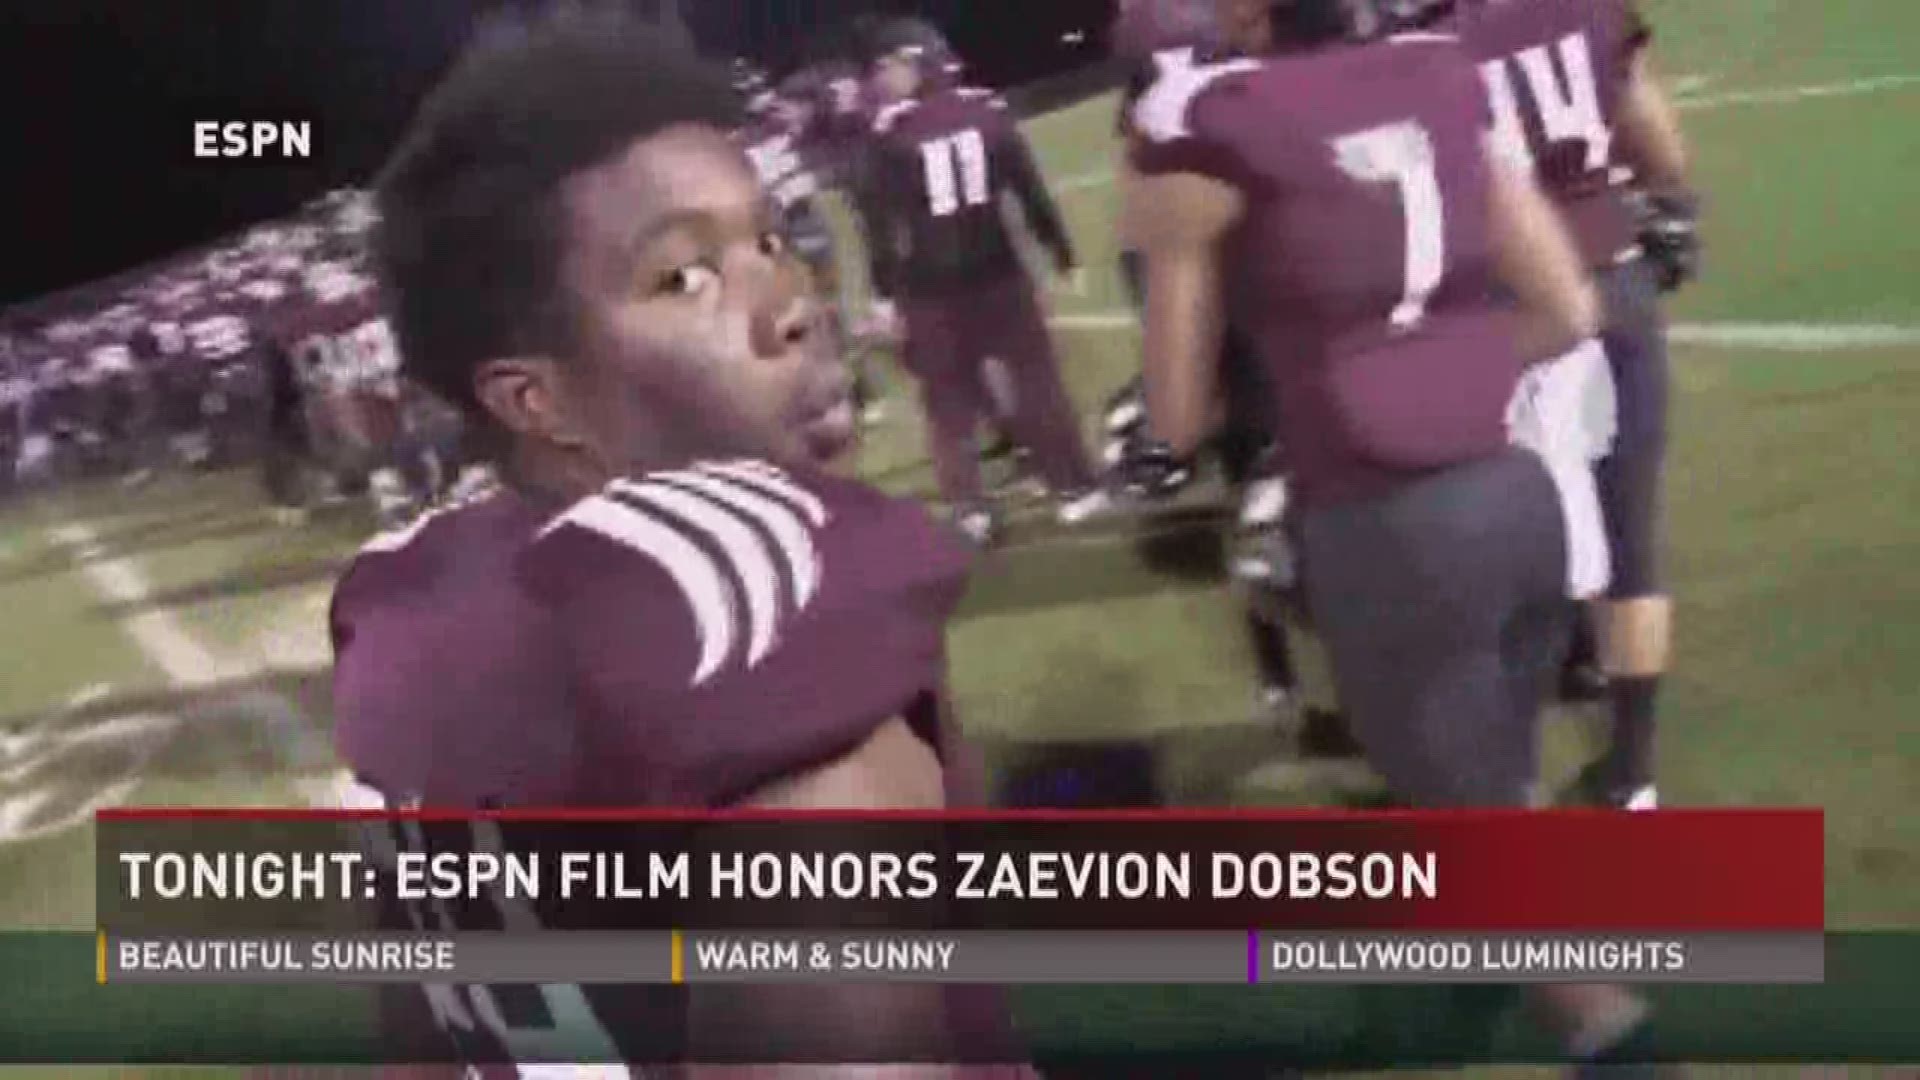 Dobson died in December 2015 while shielding his friends from gunfire.